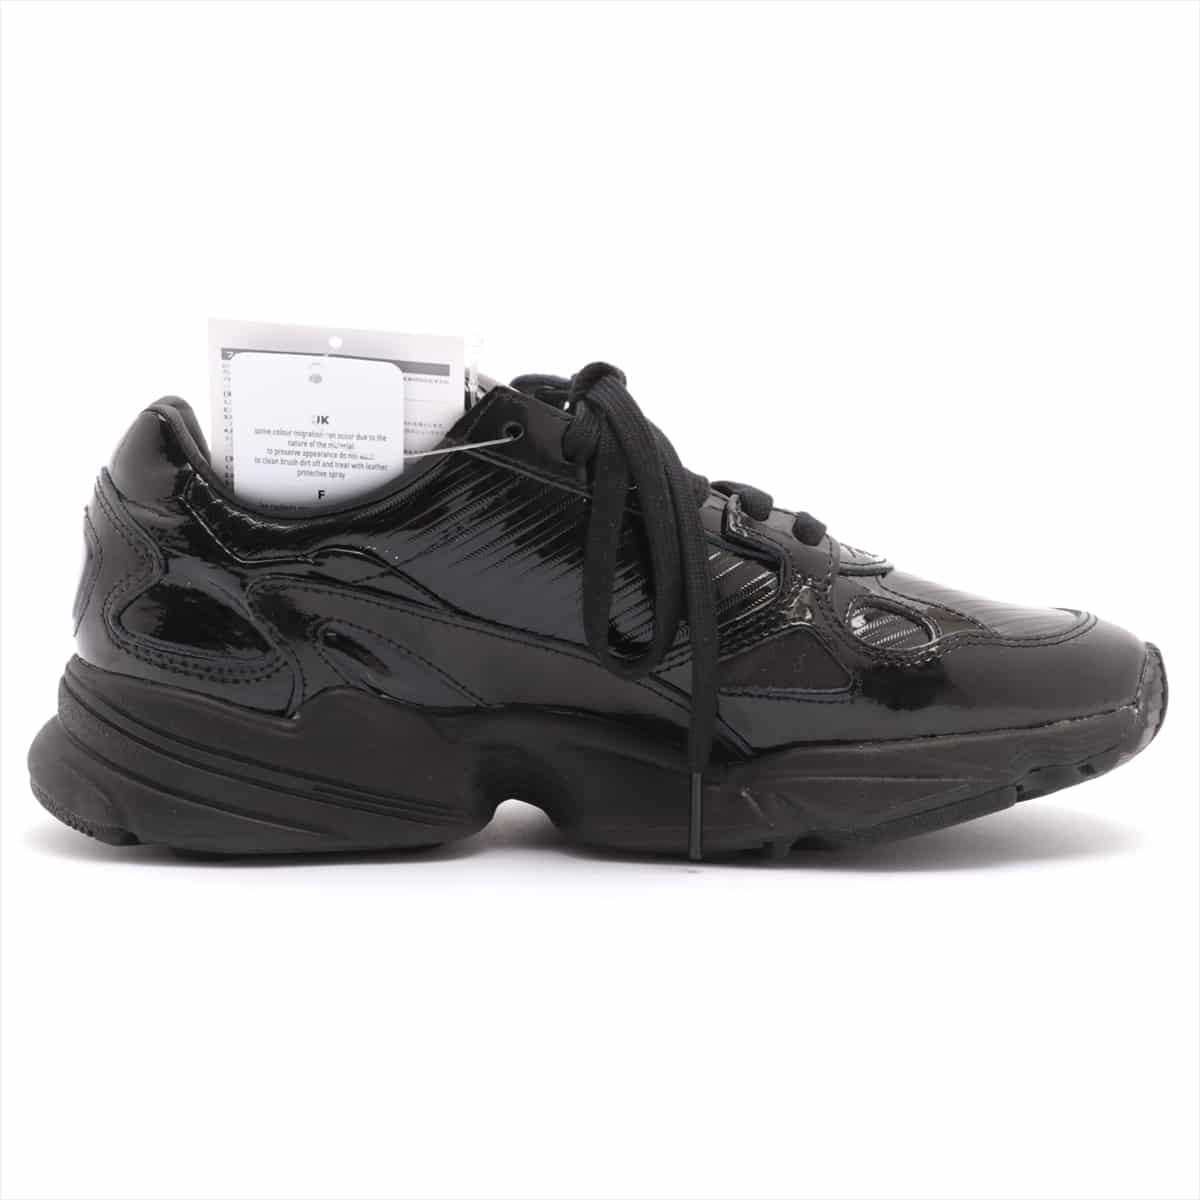 Adidas Patent leather Sneakers 24.5㎝ Ladies' Black FALCON W CG6248